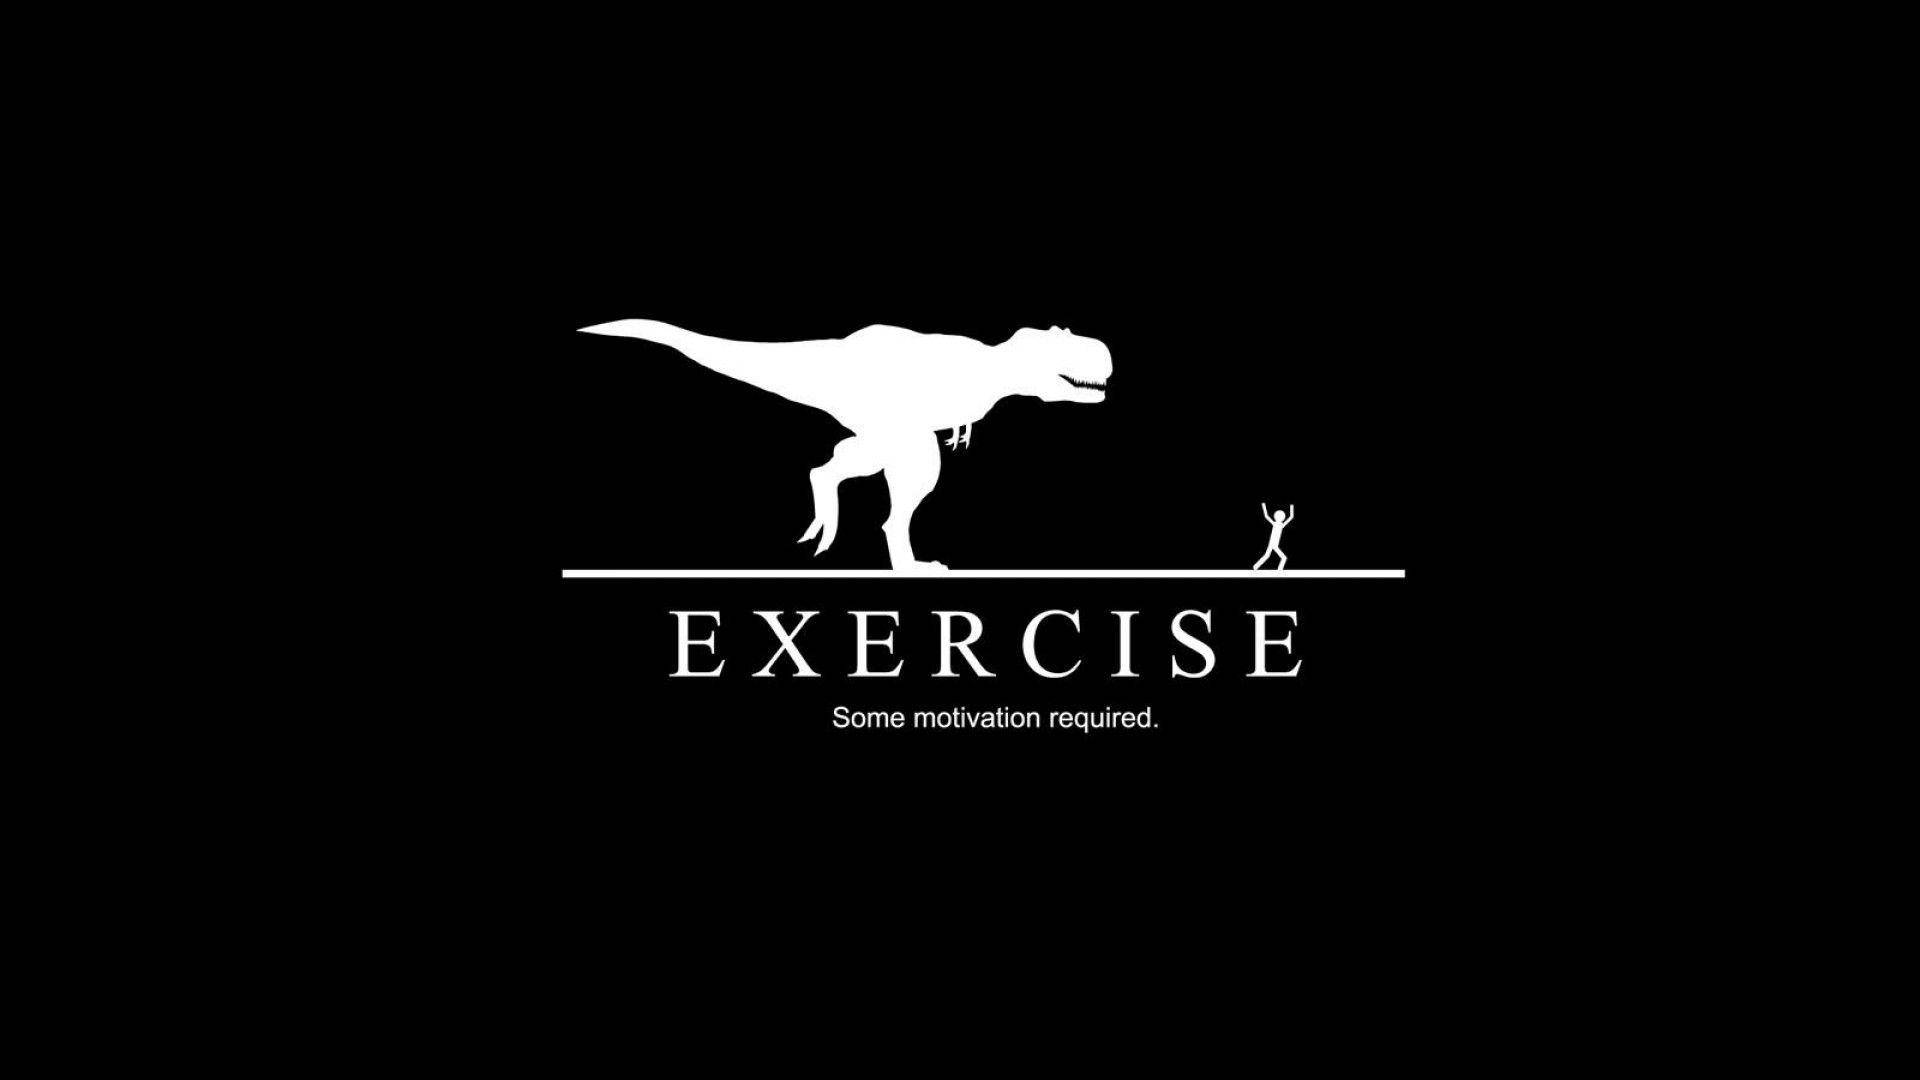 Cool Funny Exercise Motivation Wallpaper